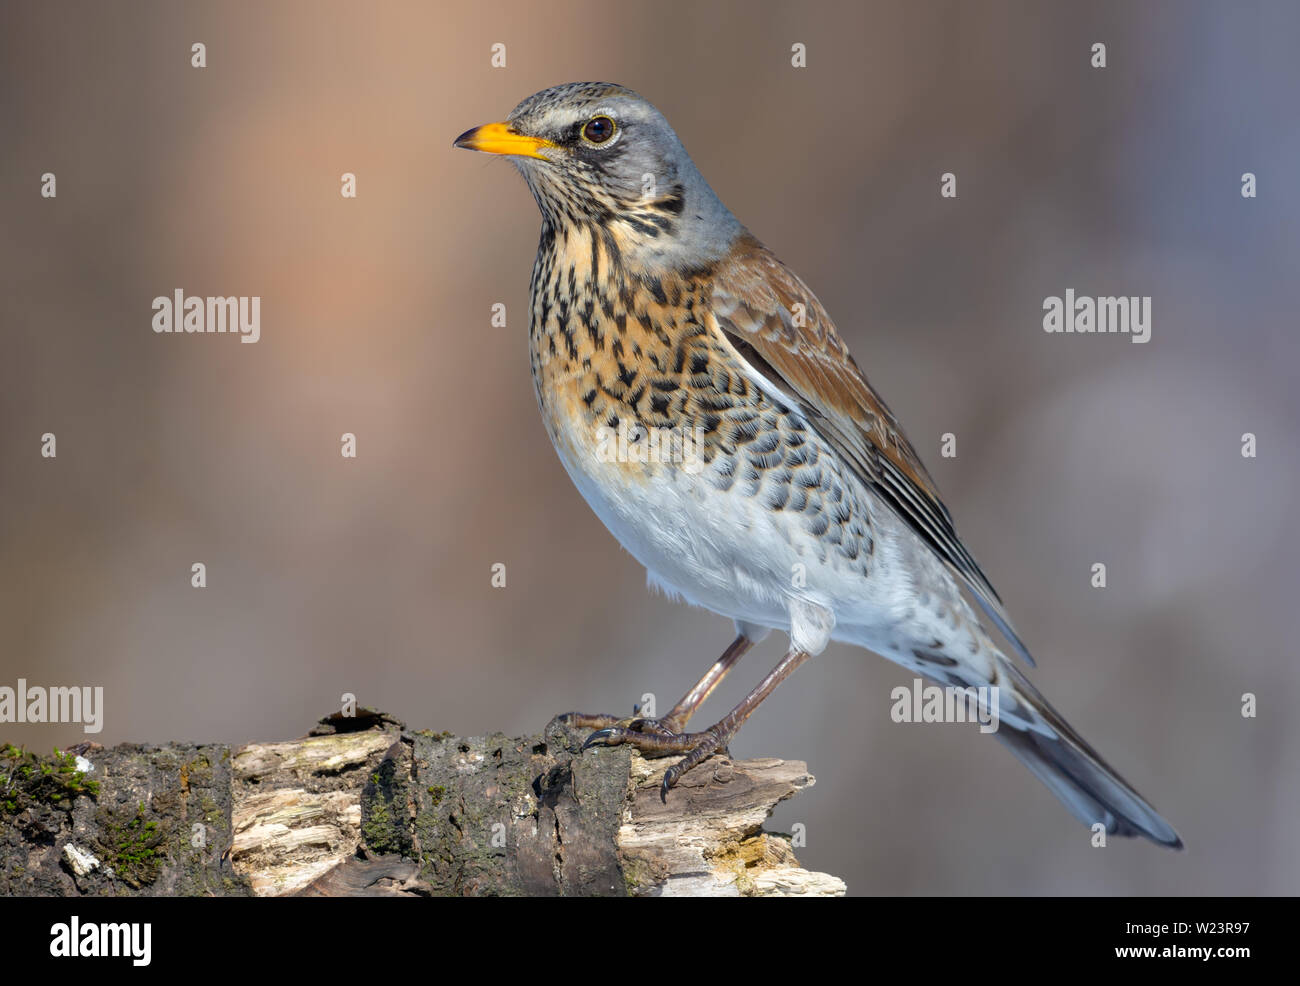 Fieldfare takes a stance on old stub in a sunny day Stock Photo